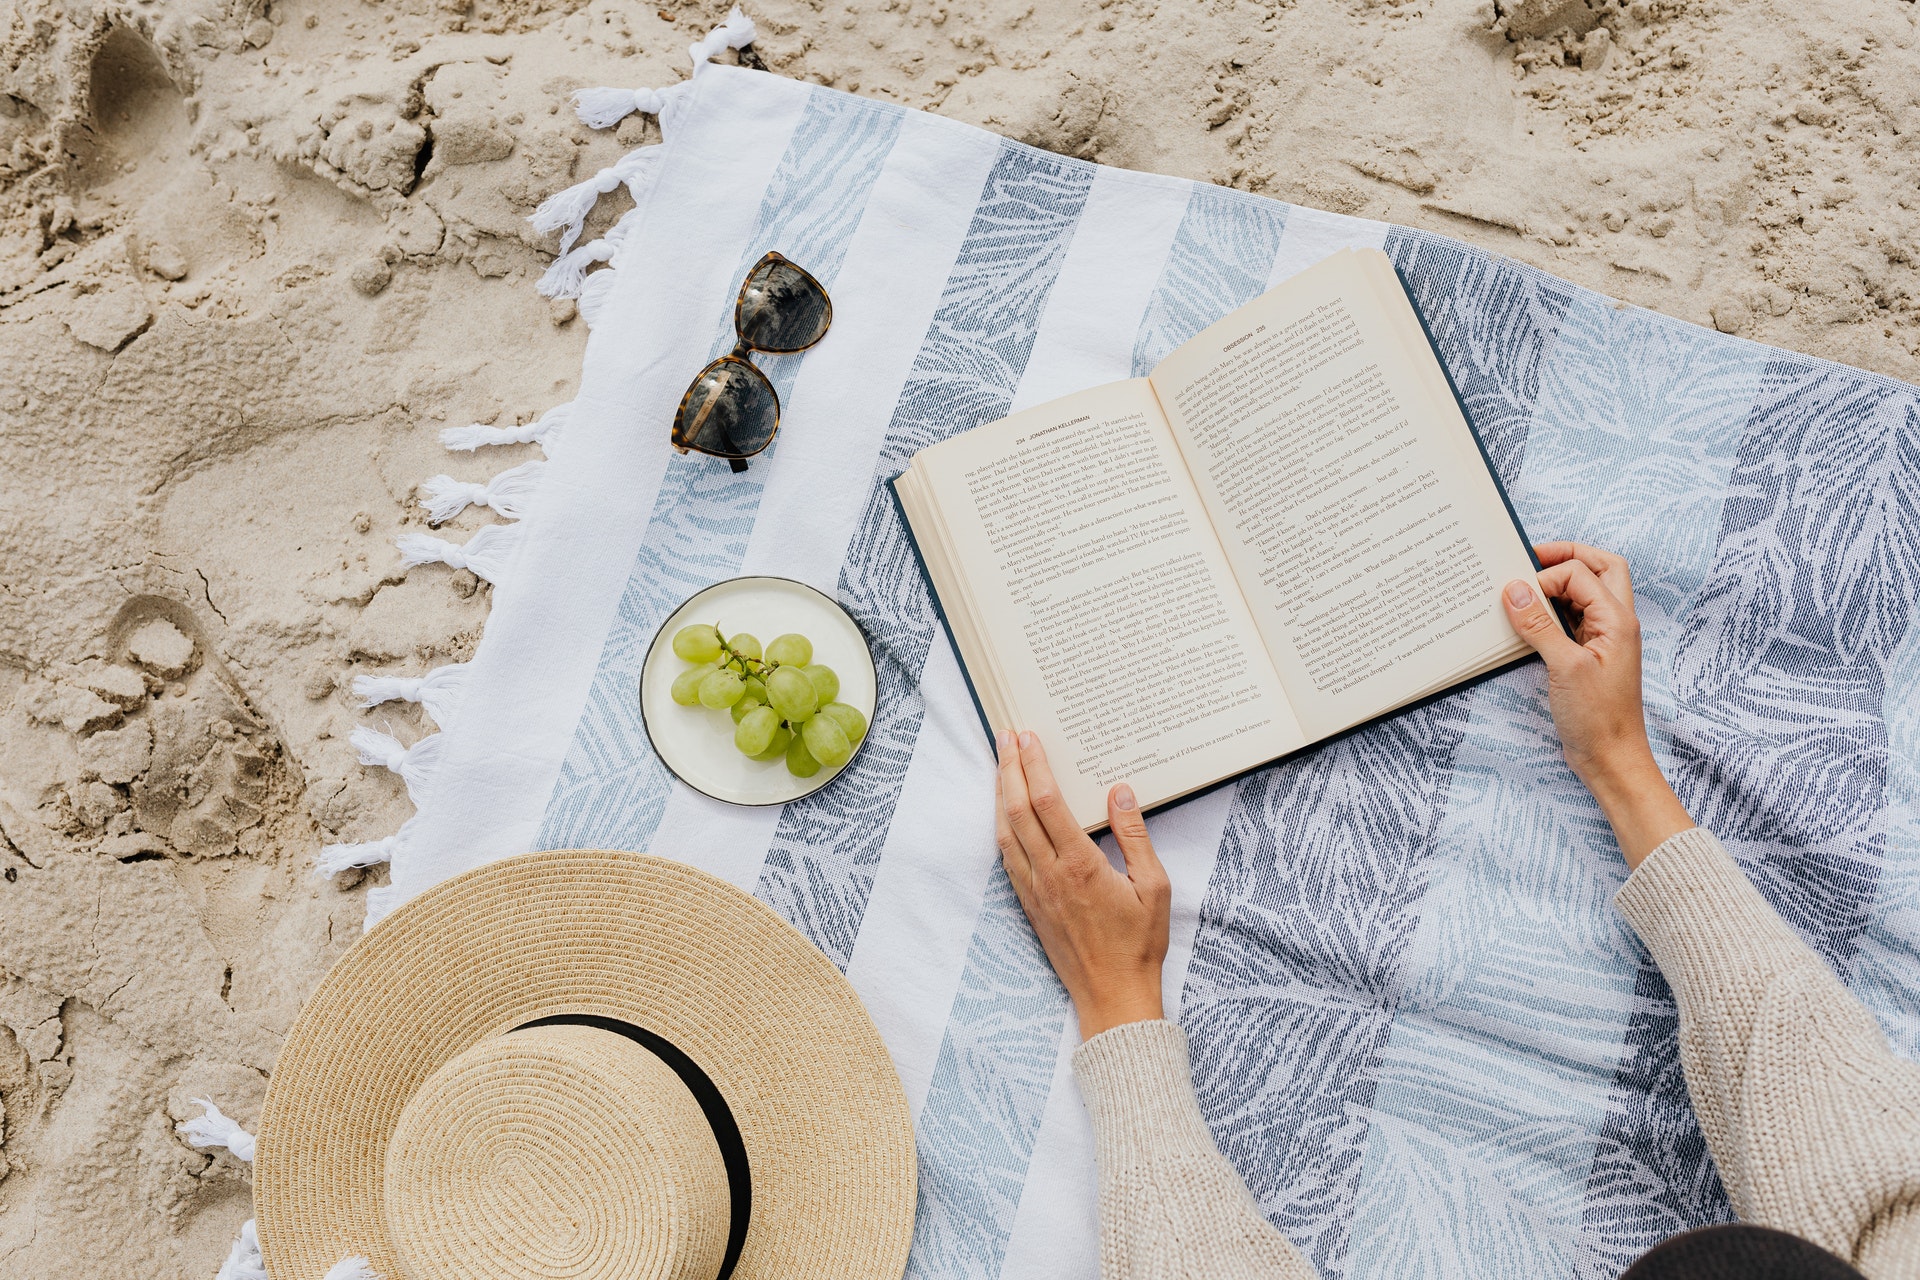 Person reading a book on a blanket over the sand